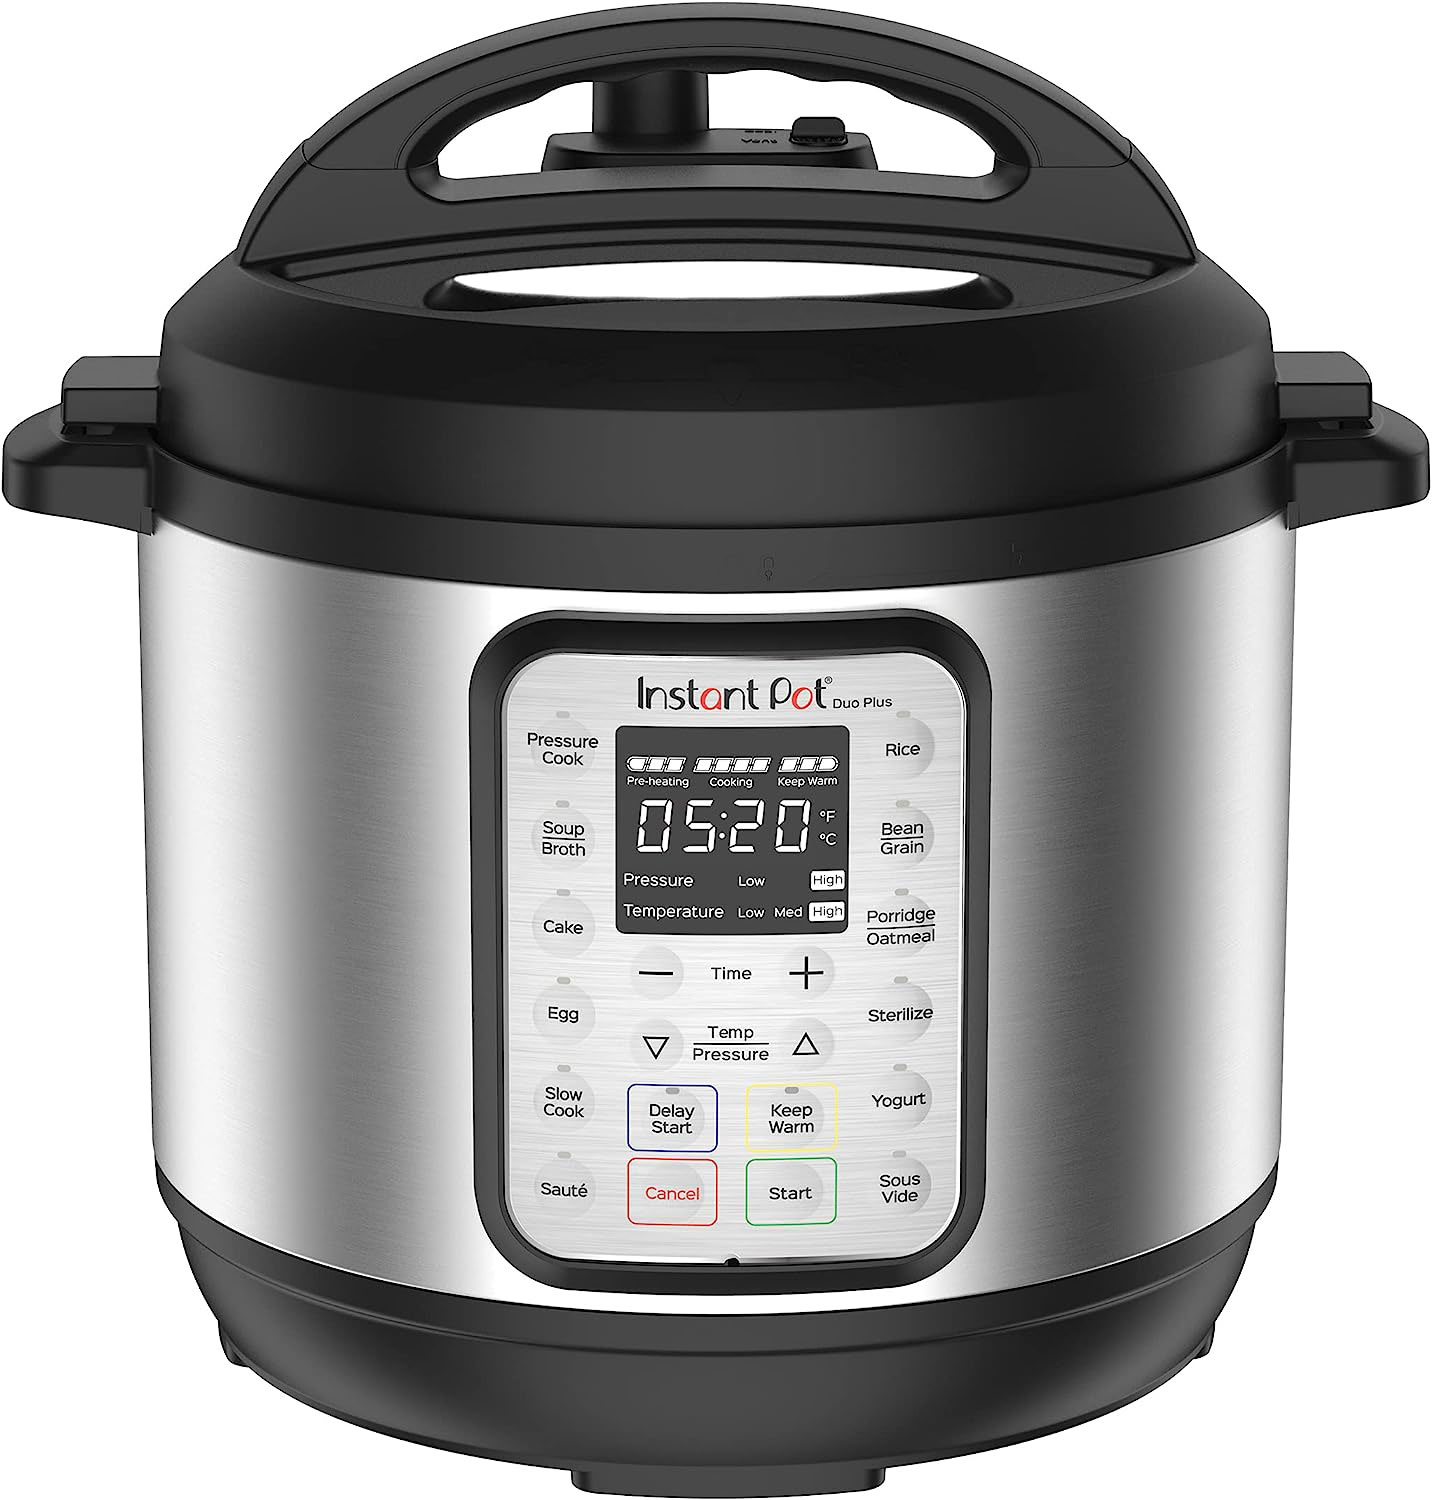 Illustration showcasing the Instant Pot Duo Plus 9-in-1 Electric Pressure Cooker in stainless steel. With its versatile functionality including pressure cooking, slow cooking, rice cooking, yogurt making, and more, this appliance is a kitchen essential. The improved easy-release steam switch and intuitive display make cooking a breeze, while the customizable Smart Programs provide one-touch cooking for a variety of dishes. The food-grade stainless steel cooking pot ensures even cooking, and the dishwasher-safe components make cleanup quick and easy. With its proven safety features, this cooker is perfect for families and offers the convenience of cooking fast or slow. Download the free Instant Pot app to unlock a world of amazing recipes for delicious meals.